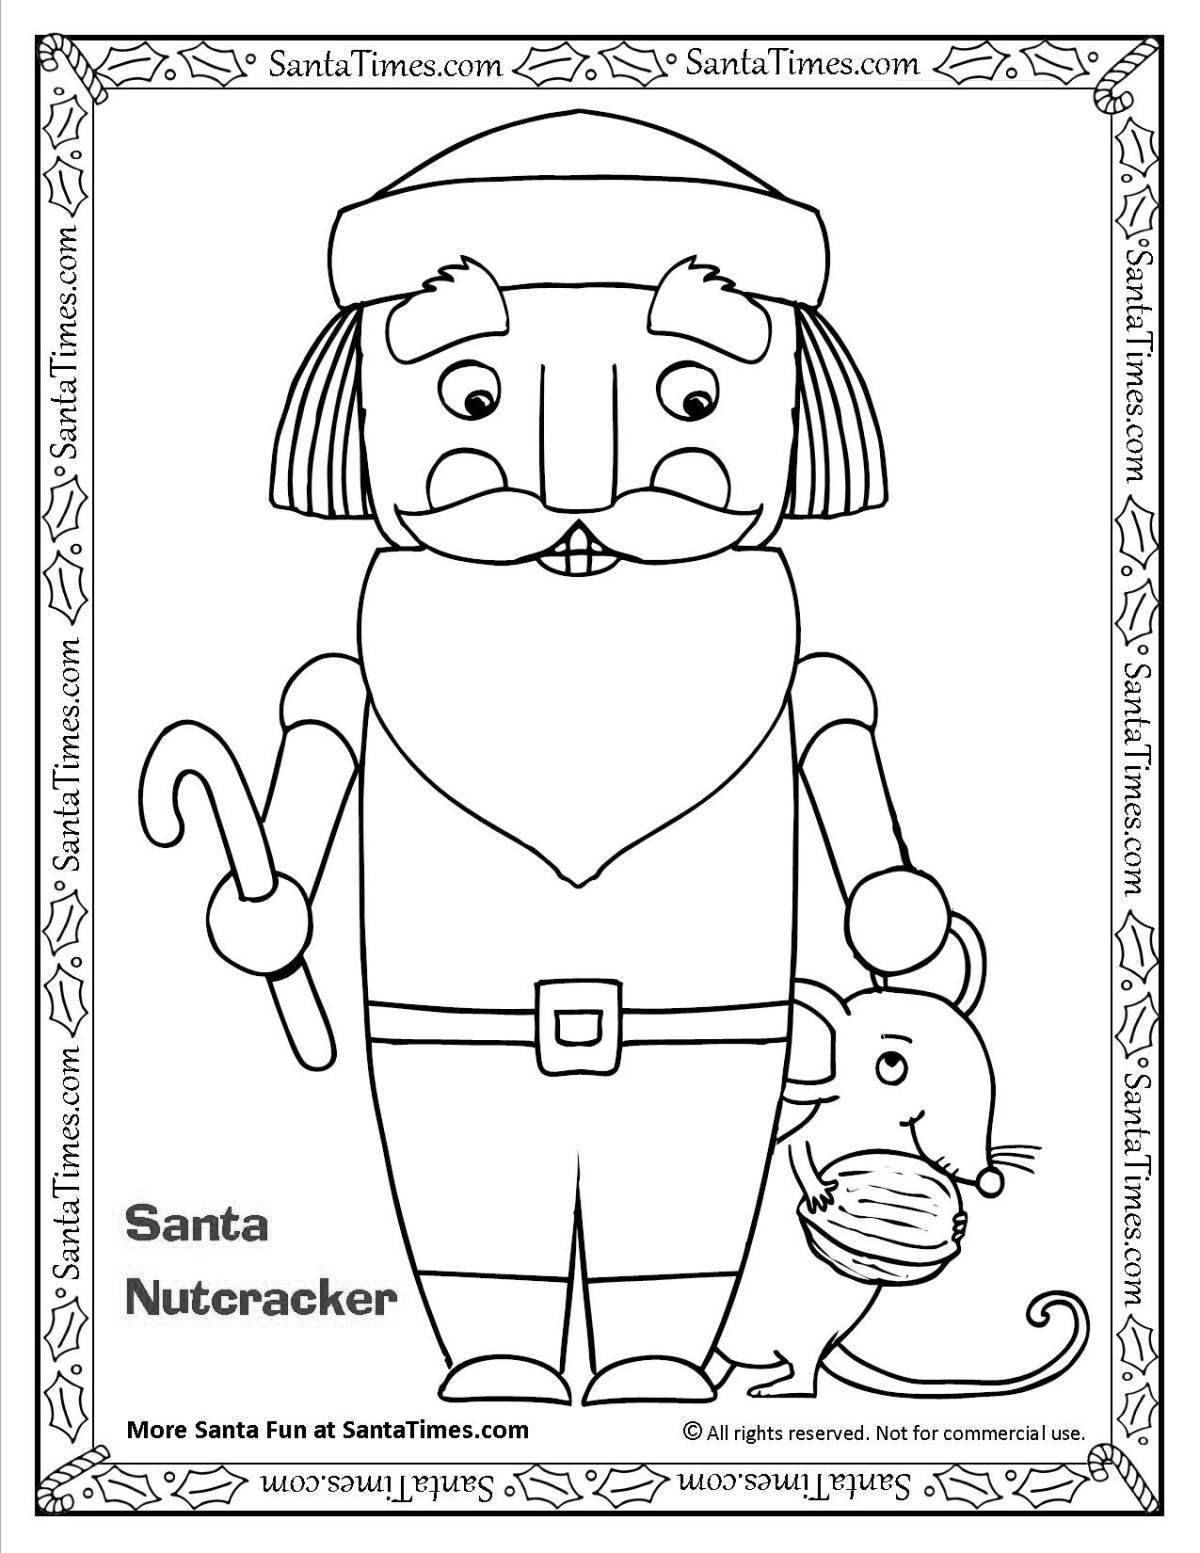 Coloring book the magic nutcracker and the mouse king